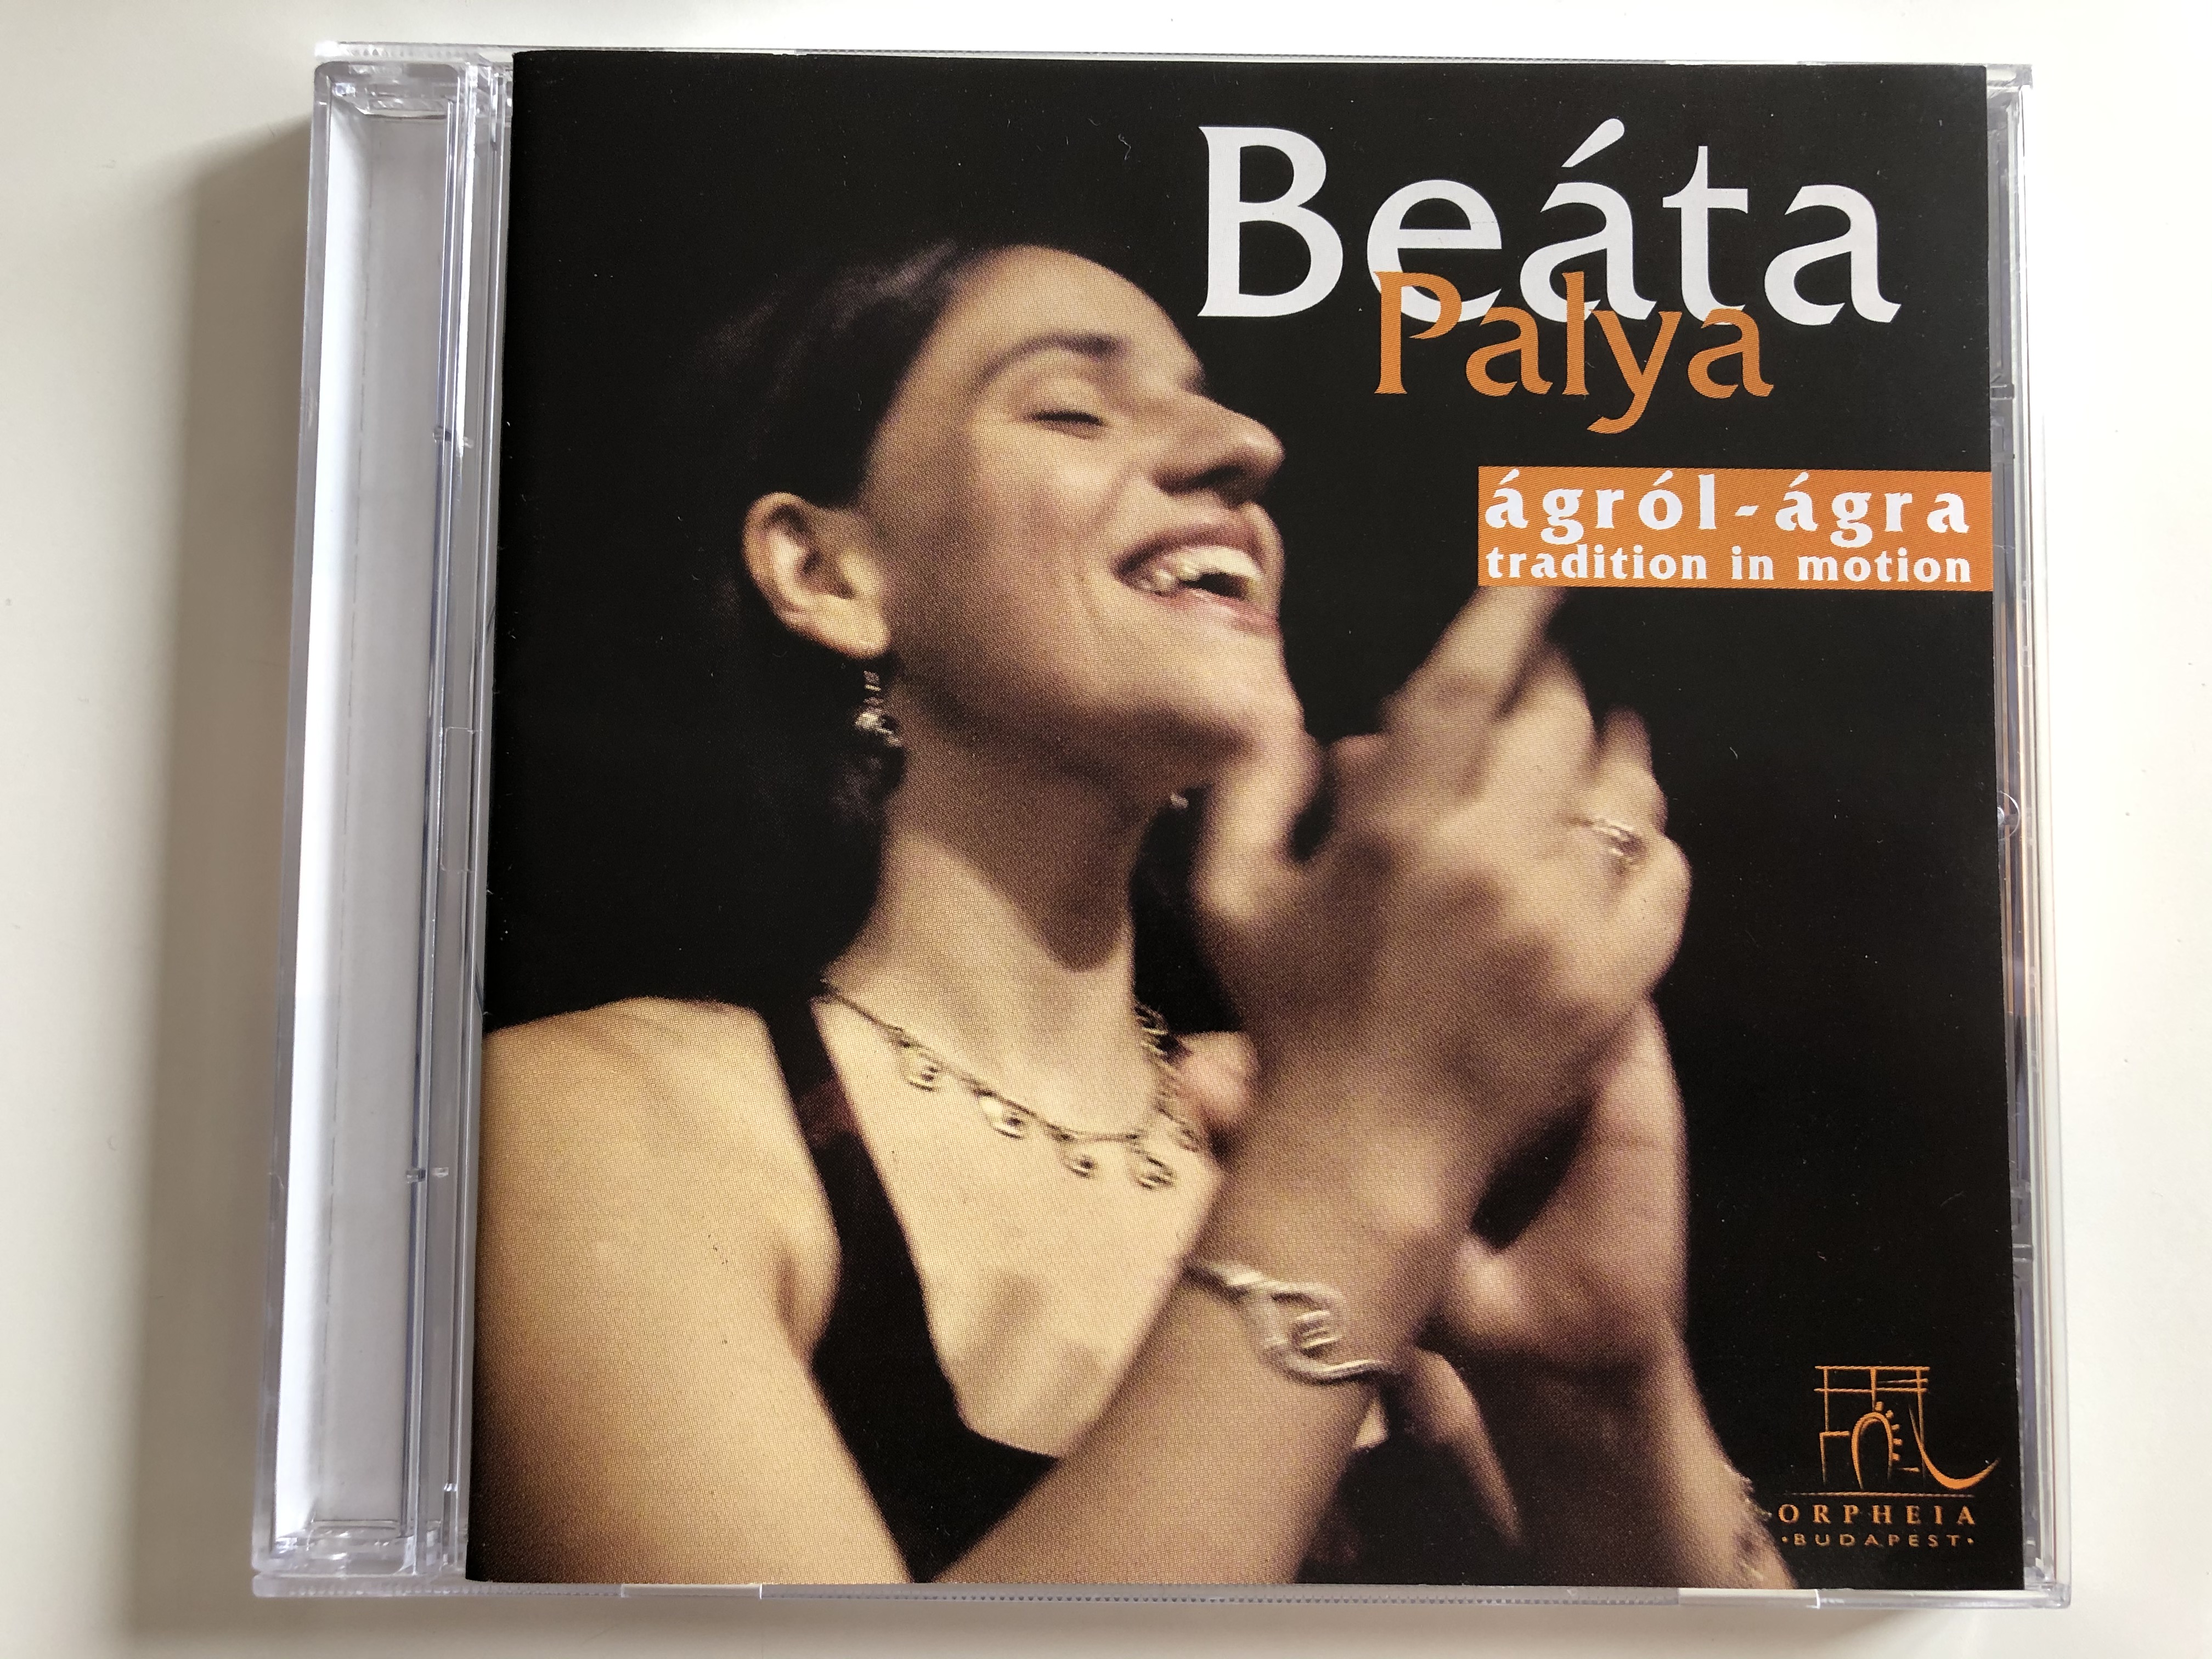 be-ta-palya-gr-l-gra-tradition-in-motion-orpheia-audio-cd-2003-orp003bea1-1-.jpg